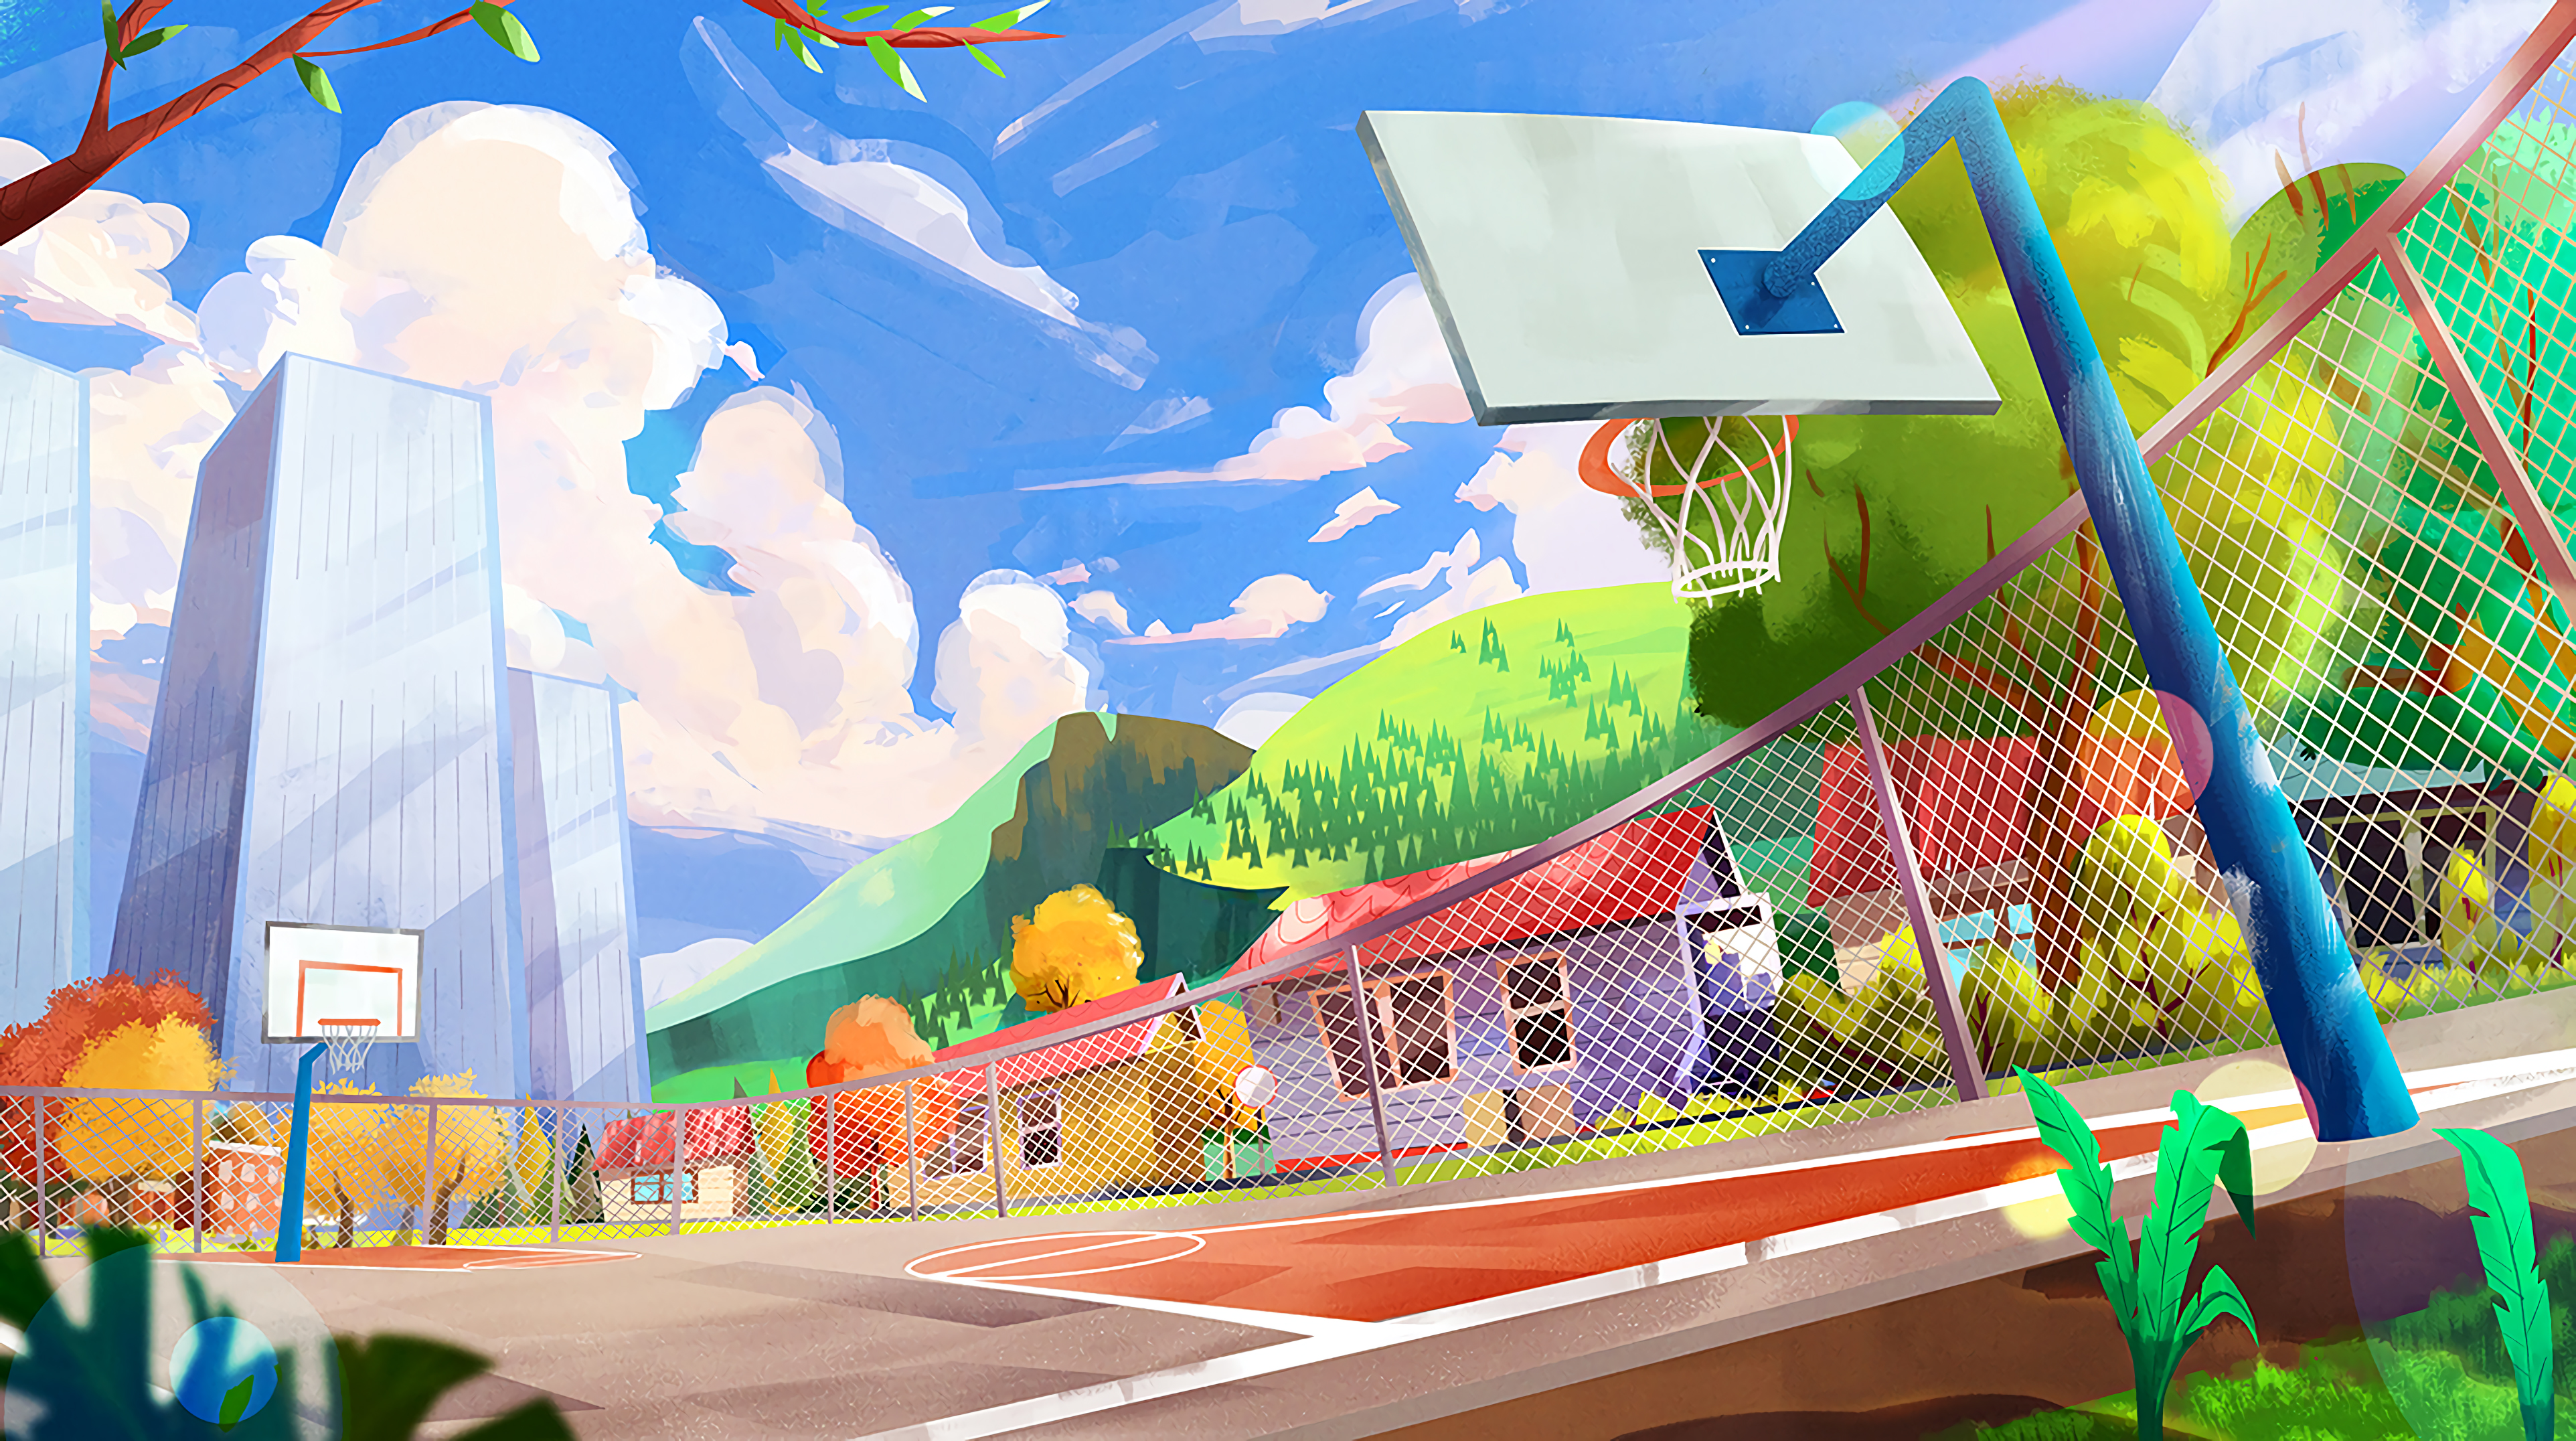 Free Backgrounds colourful, art, sports ground, basketball hoop